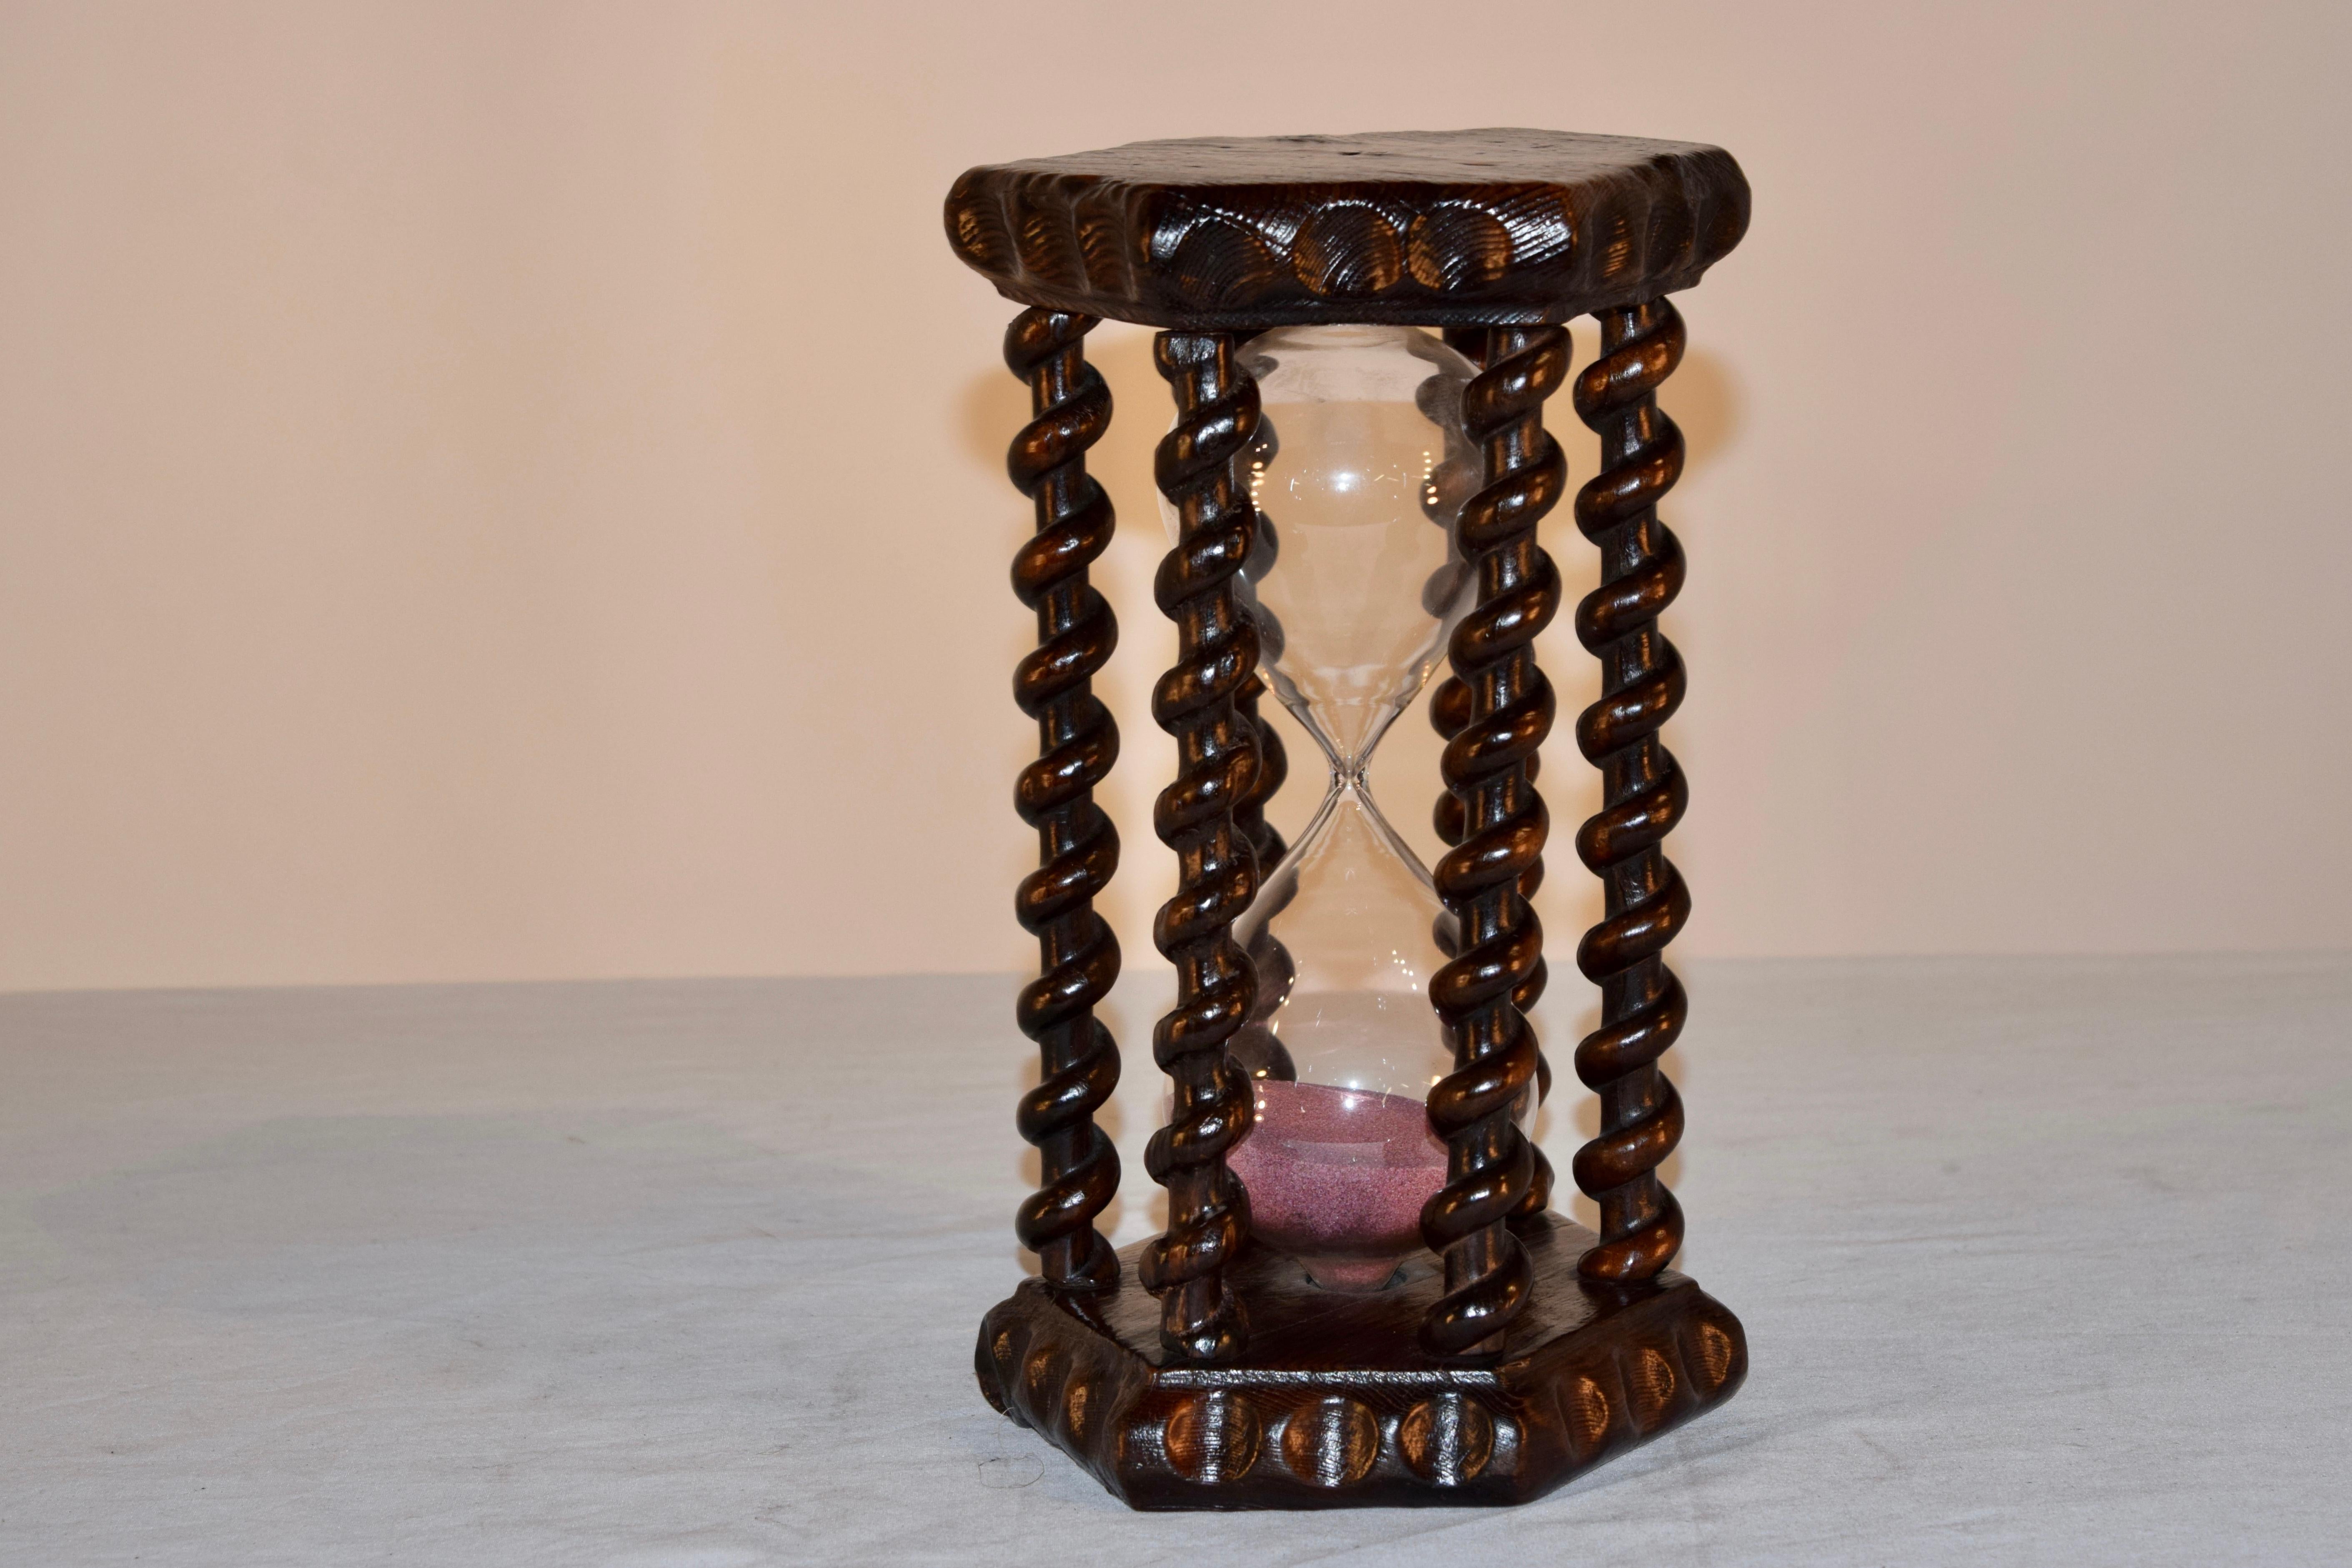 Hand-Carved 19th Century English Hourglass